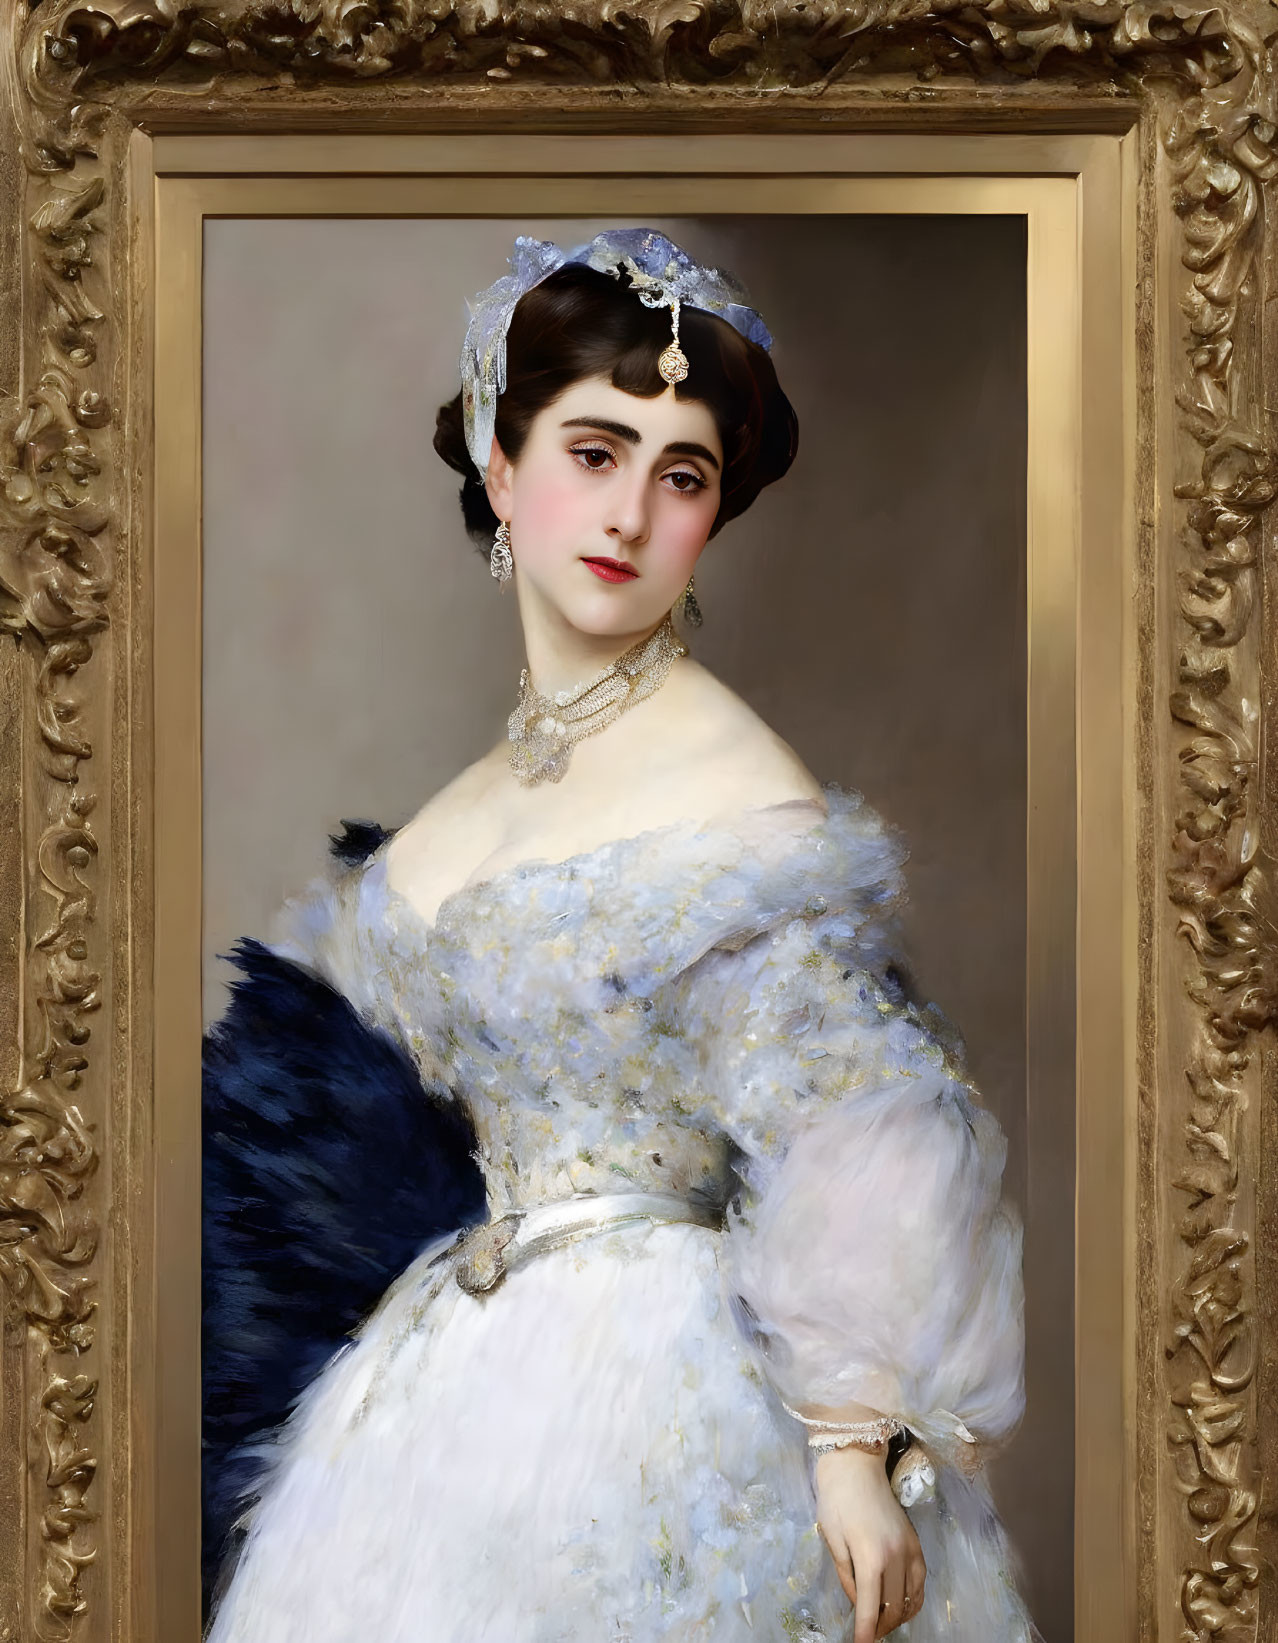 Portrait of Woman in White Dress with Blue Accents and Feathers in Gold Frame